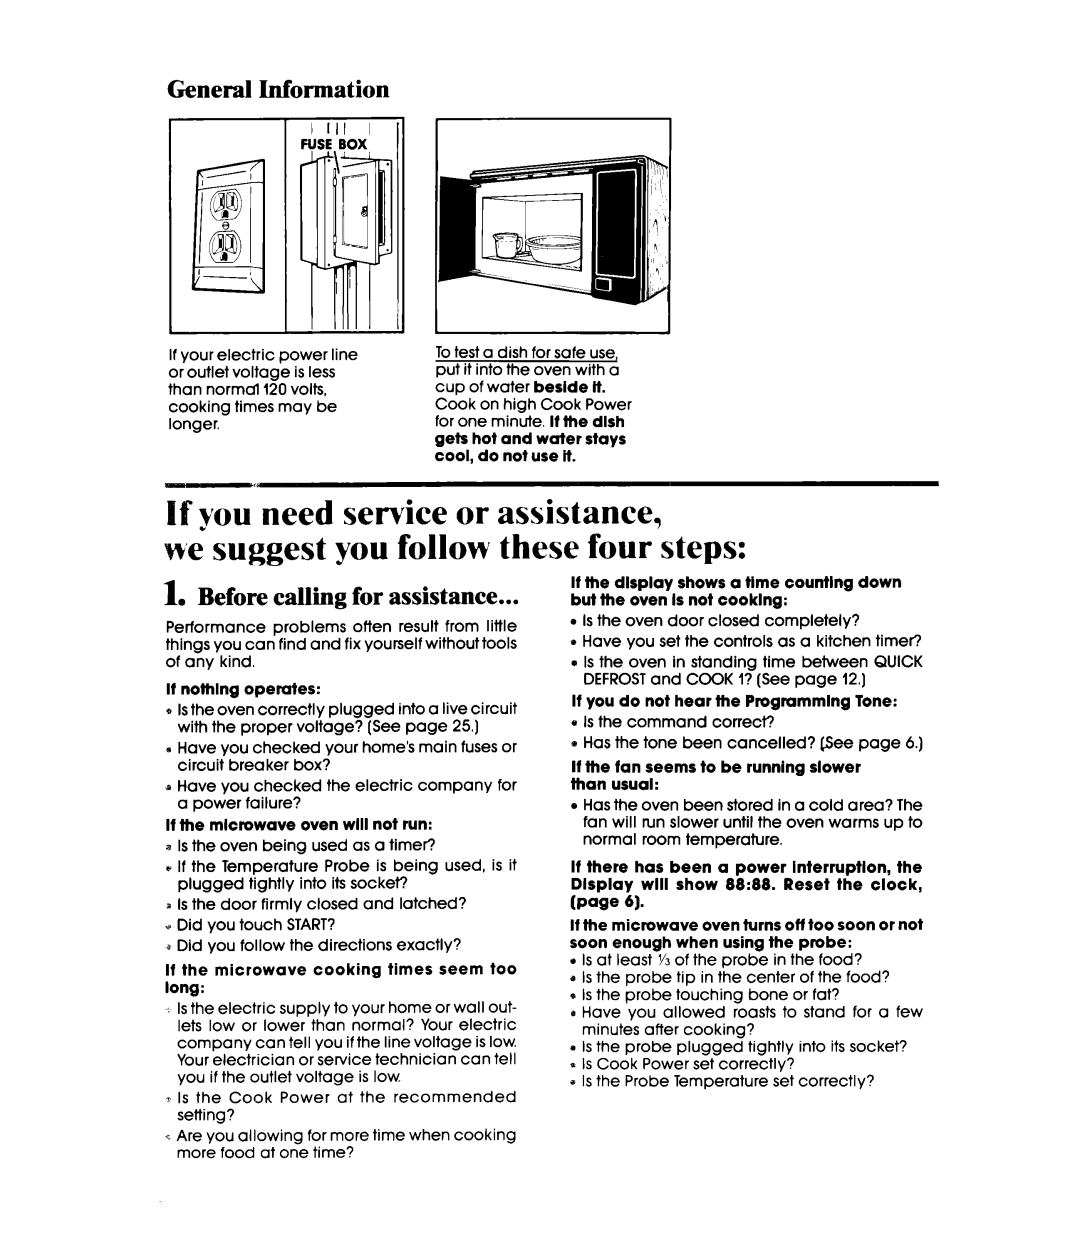 Whirlpool MW3601XW manual If vou need service or assistance, wk suggest you follow these four steps, General Information T 